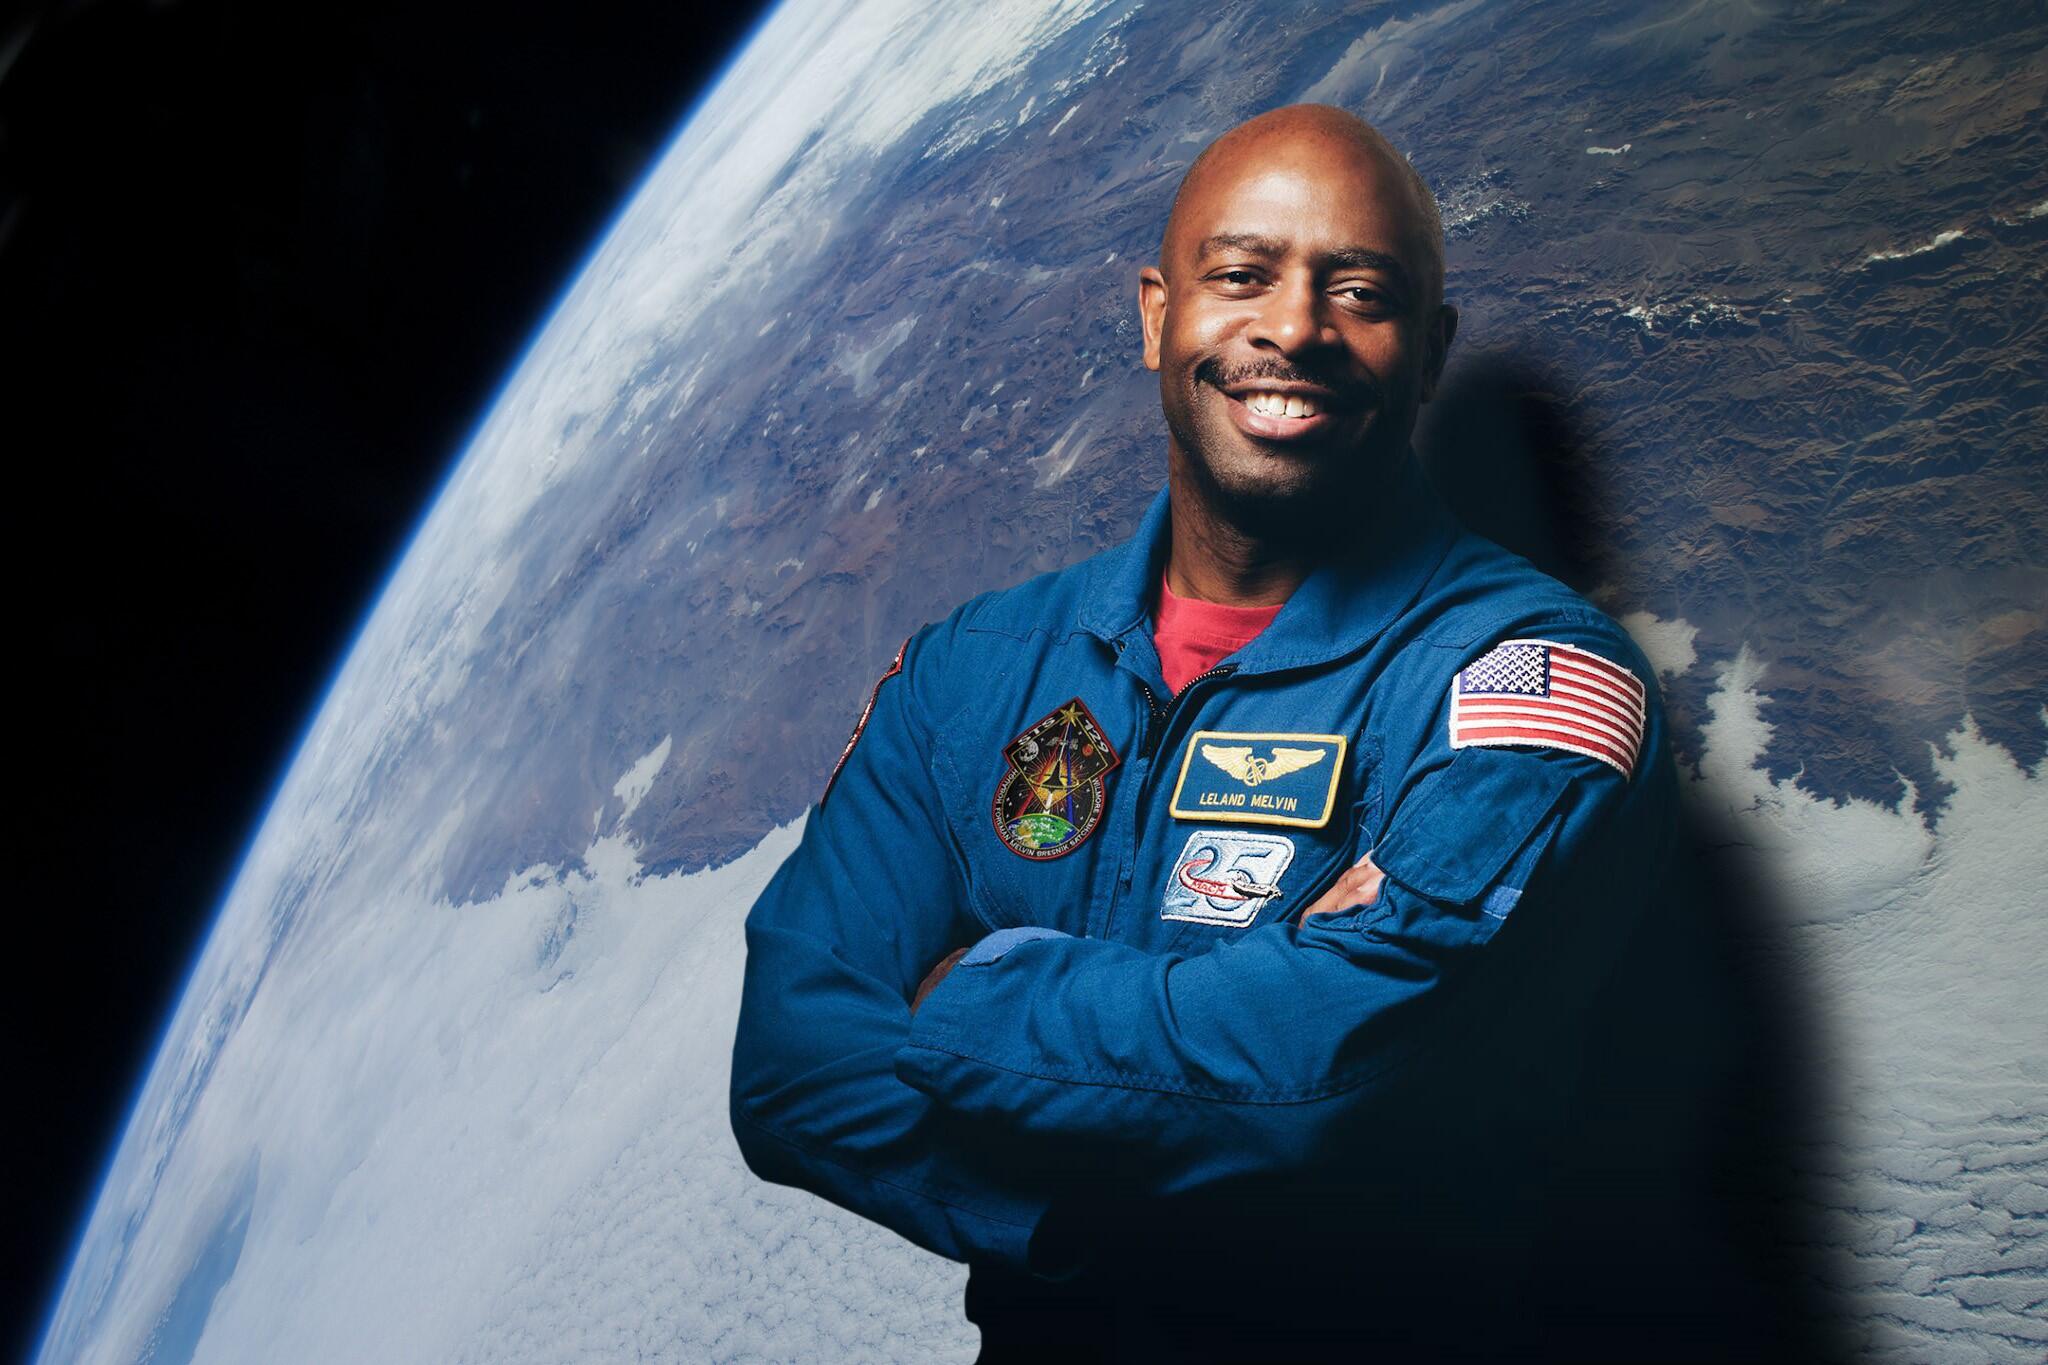 Leland Melvin poses in front of a photo of the Earth taken from space. Patches on his jacket include his nametag, the flag of the United States, the 25th-anniversary patch of the Space Shuttle, and the STS 129 mission patch.